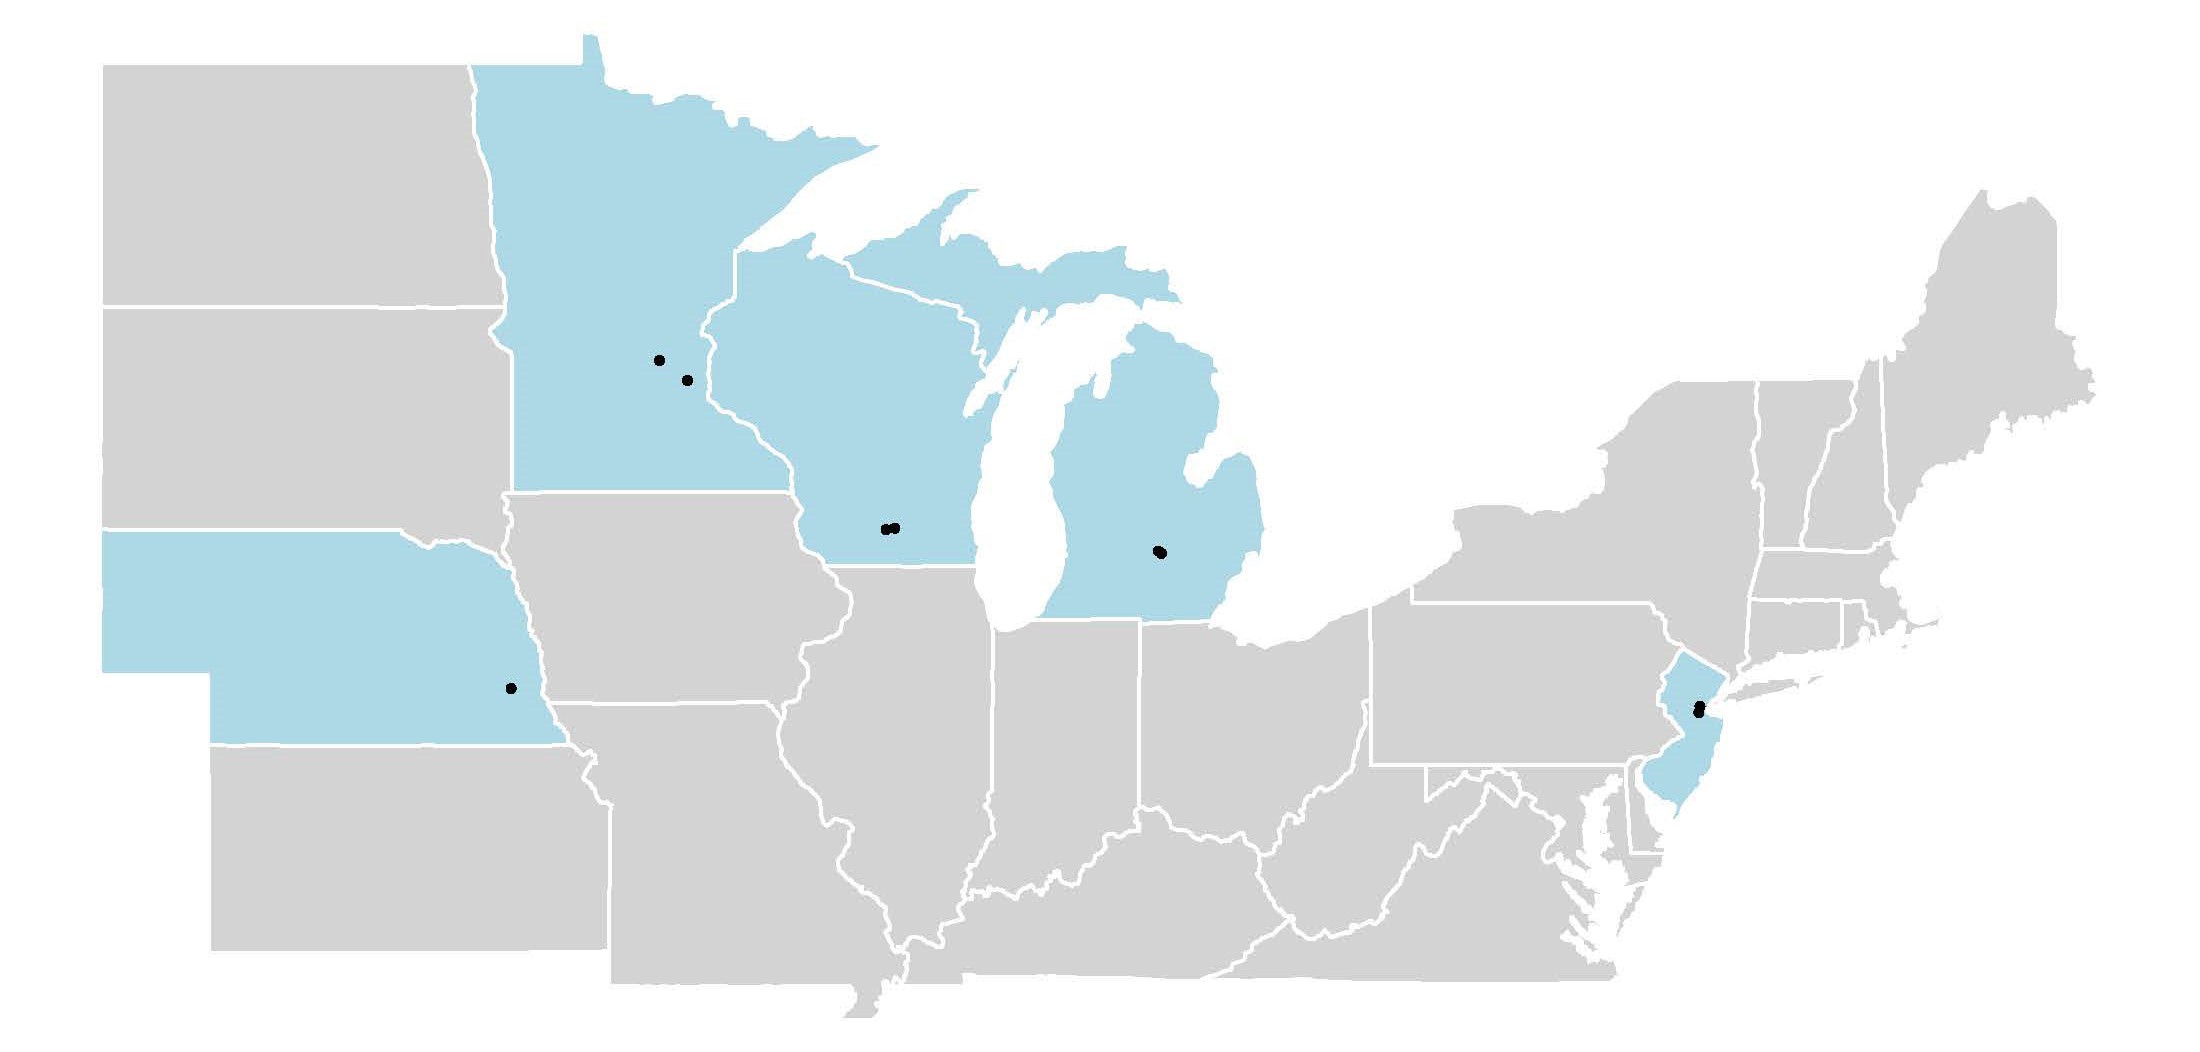 Project research sites in New Jersey, Minnesota, Nebraska, Michigan and Wisconsin